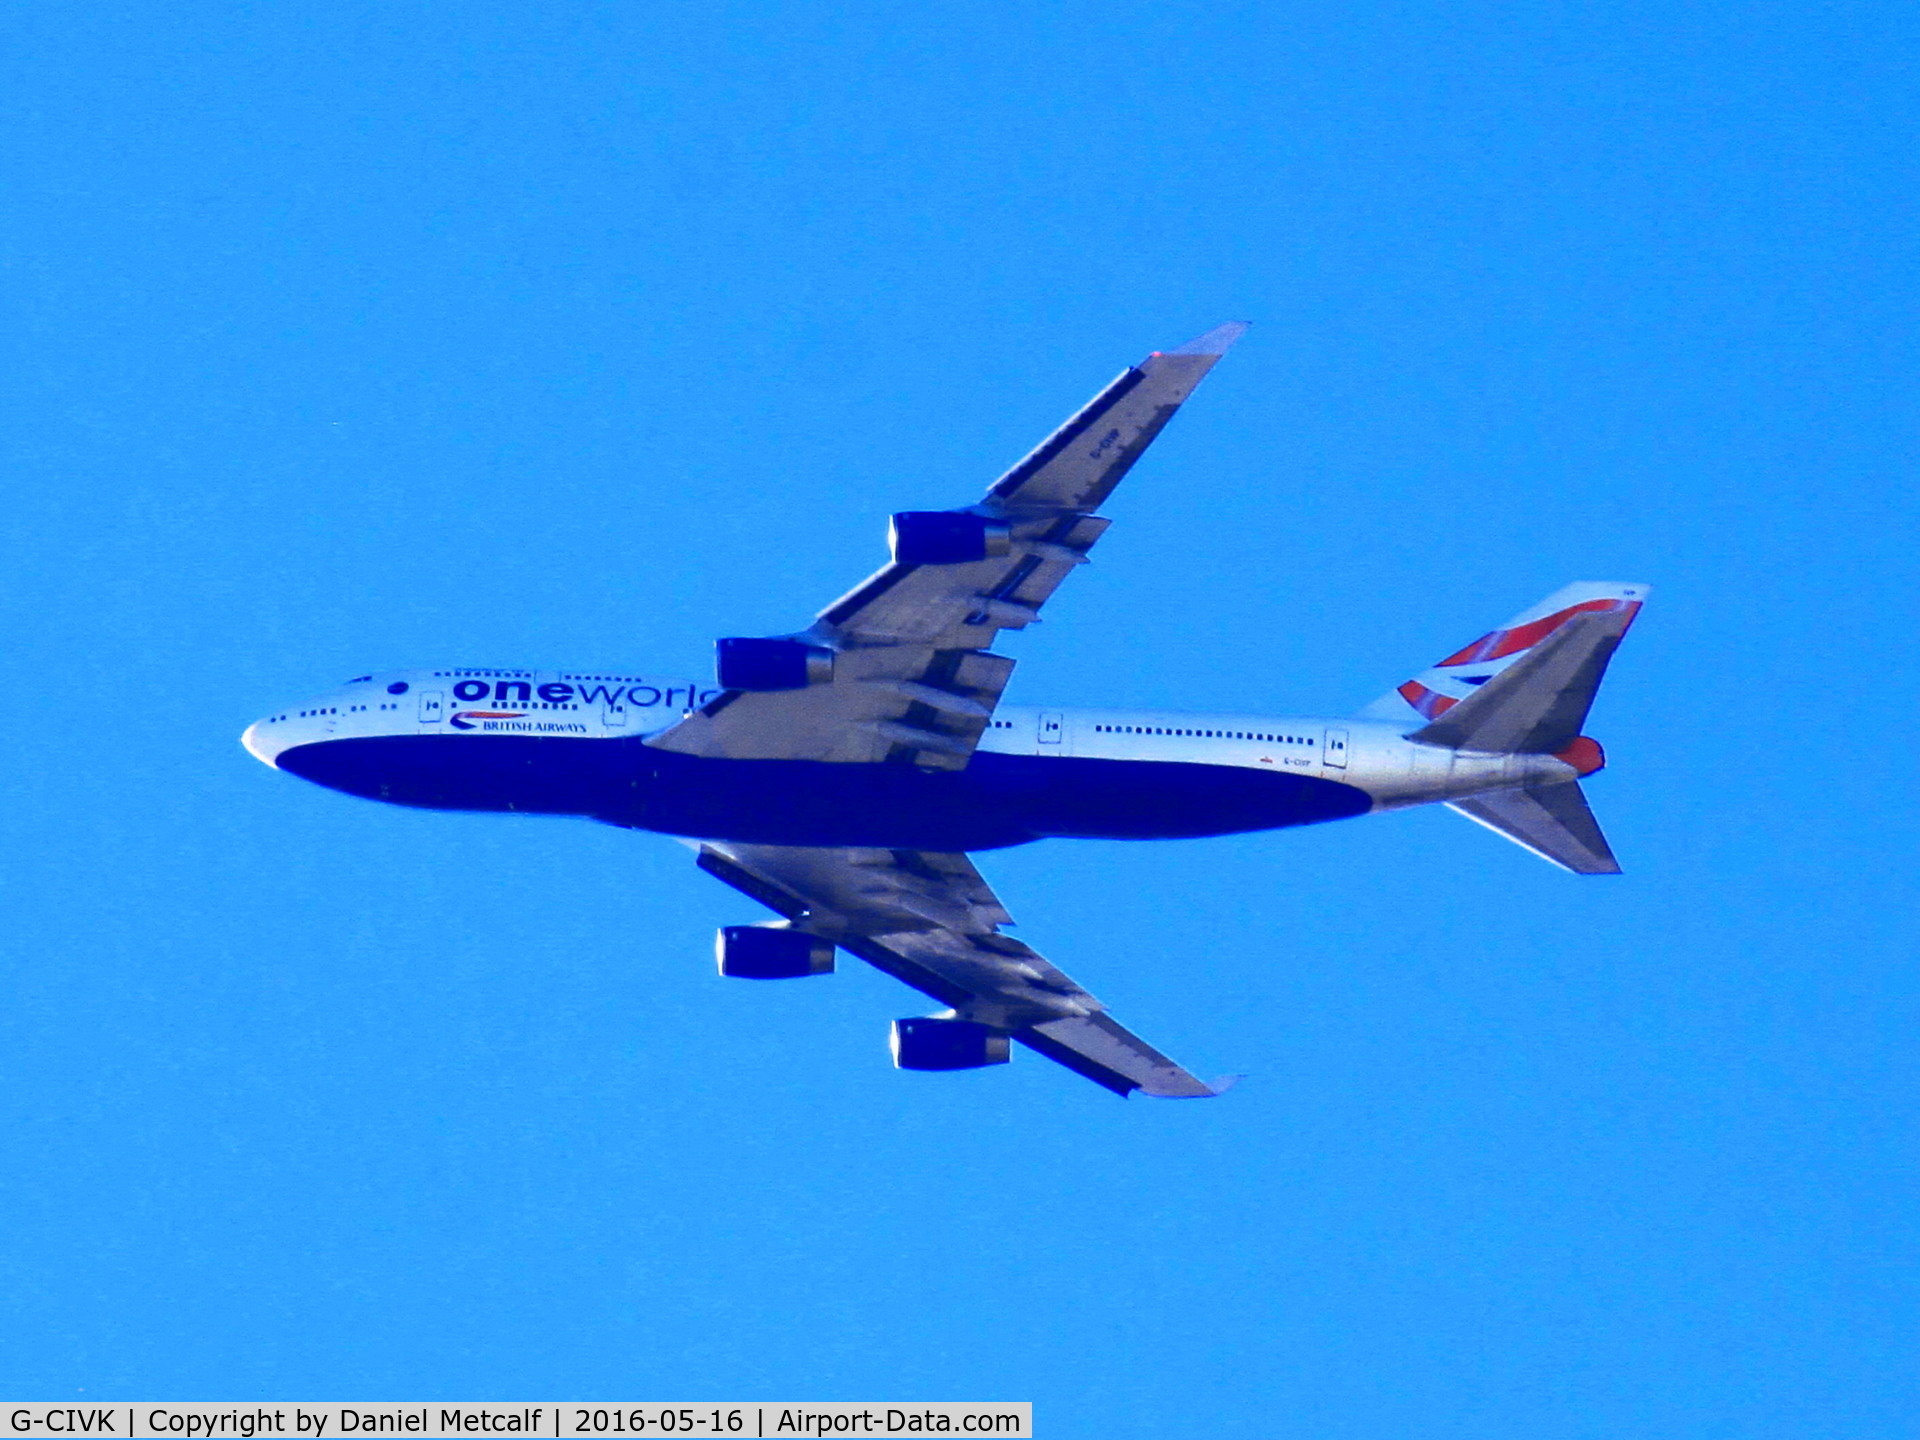 G-CIVK, 1997 Boeing 747-436 C/N 25818, Flying over my grandmother's house